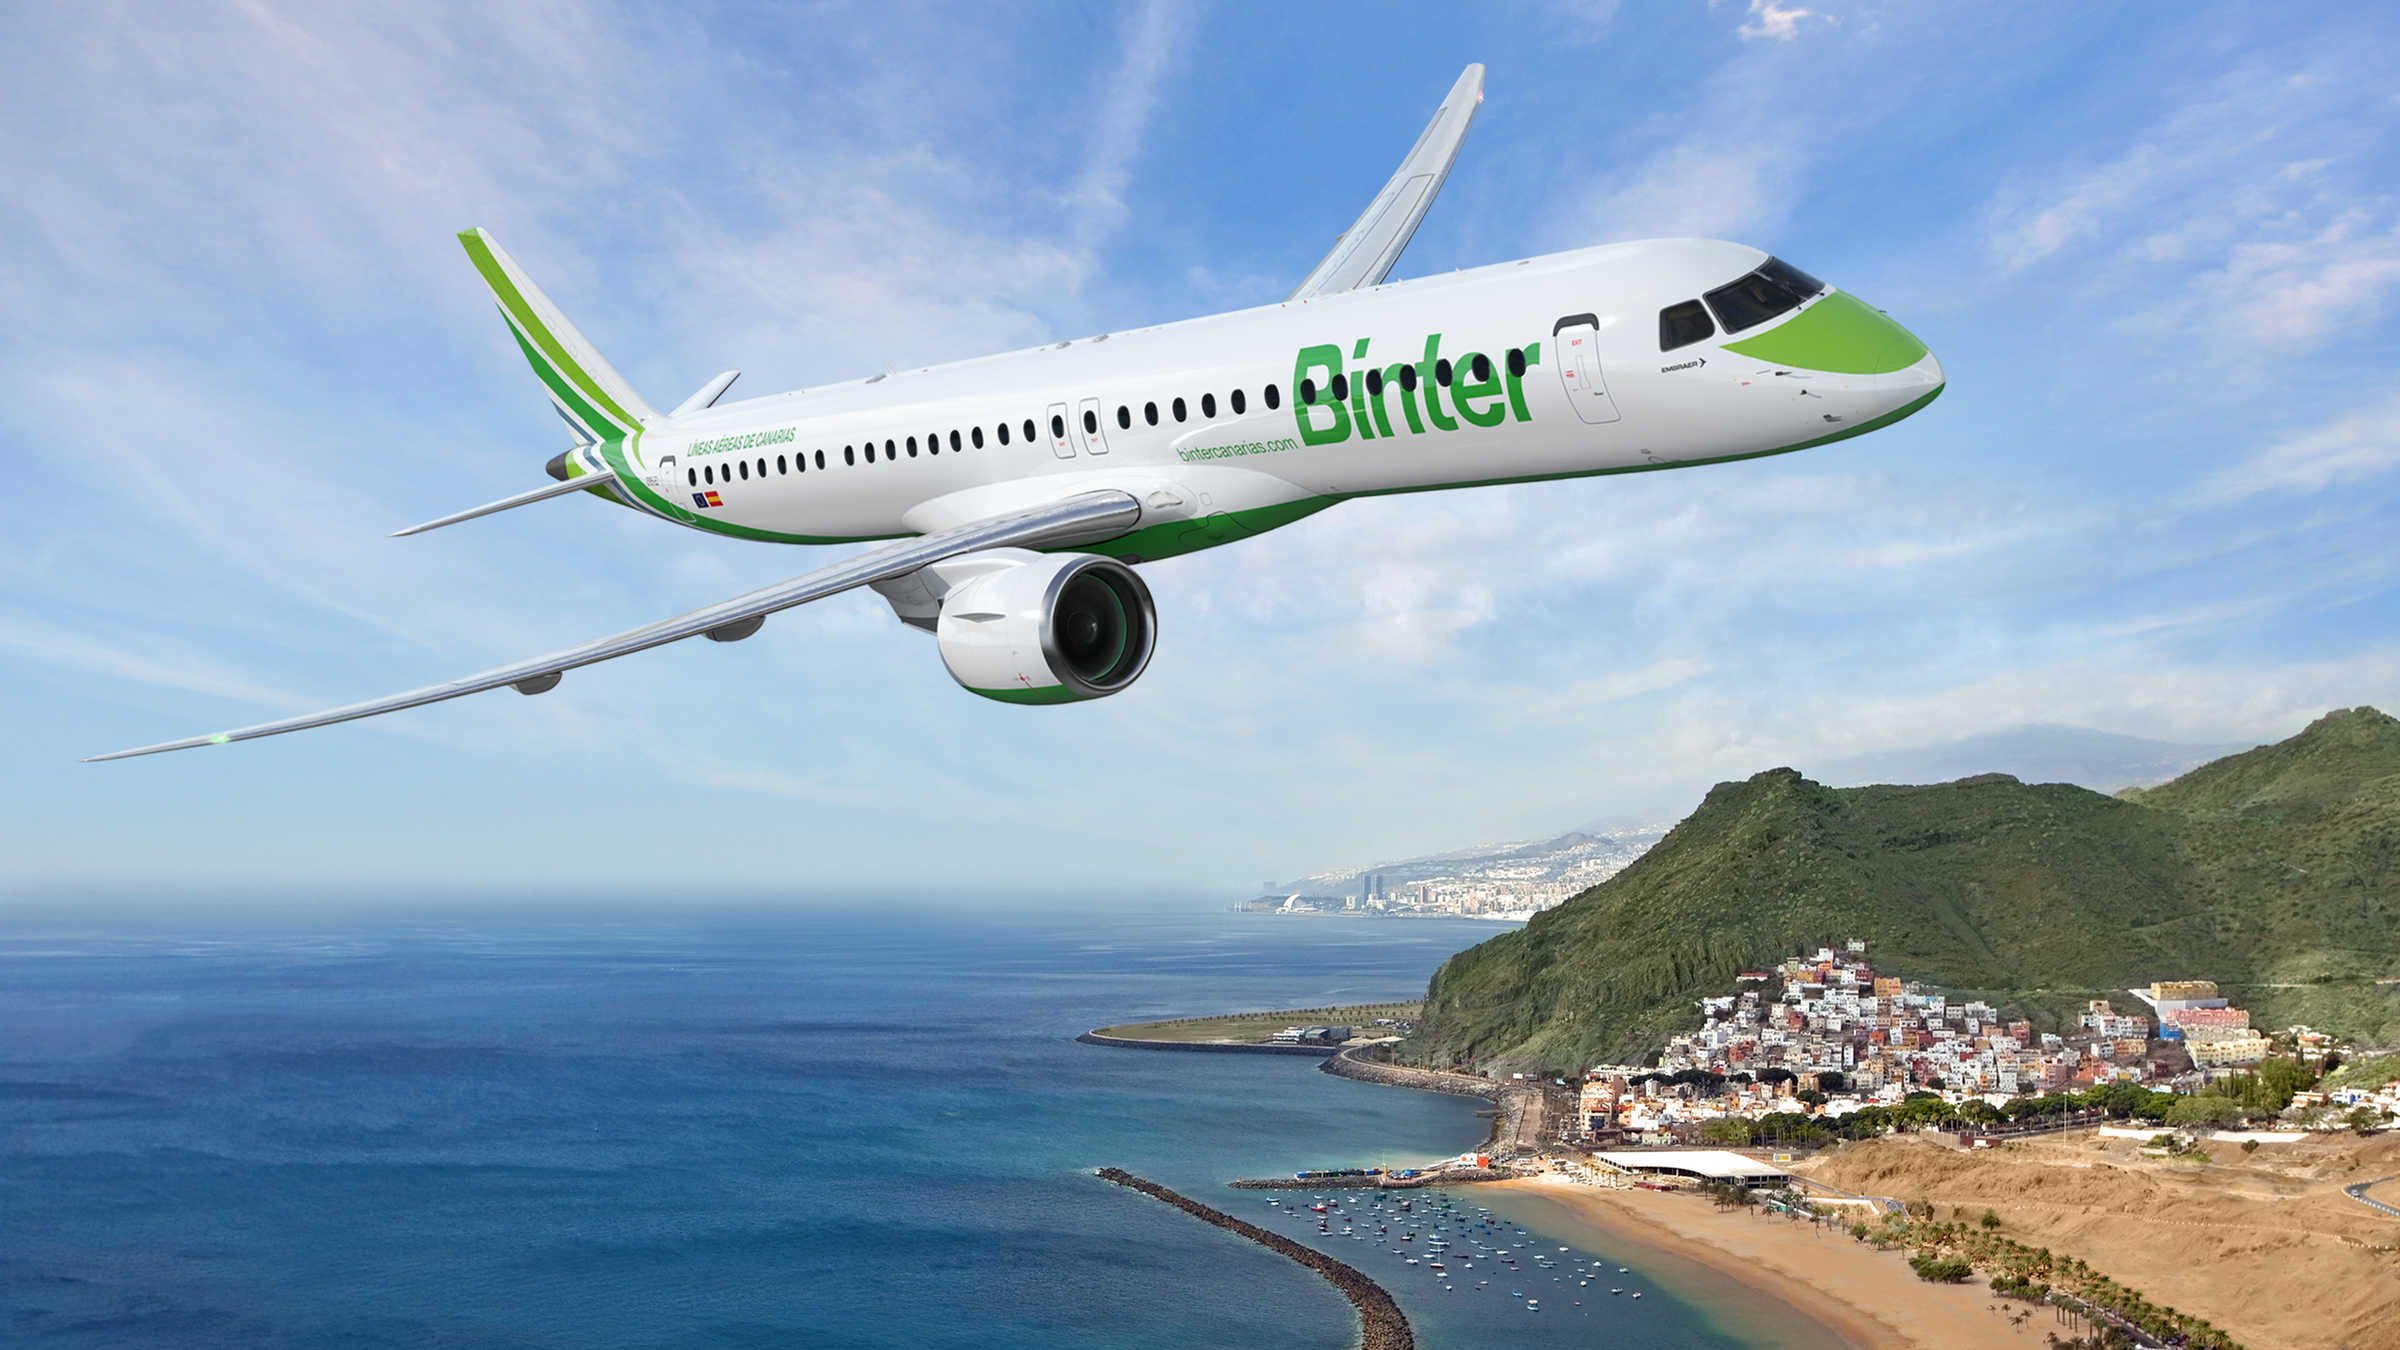 Spanish airline Binter set to receive two E195-E2s aircraft